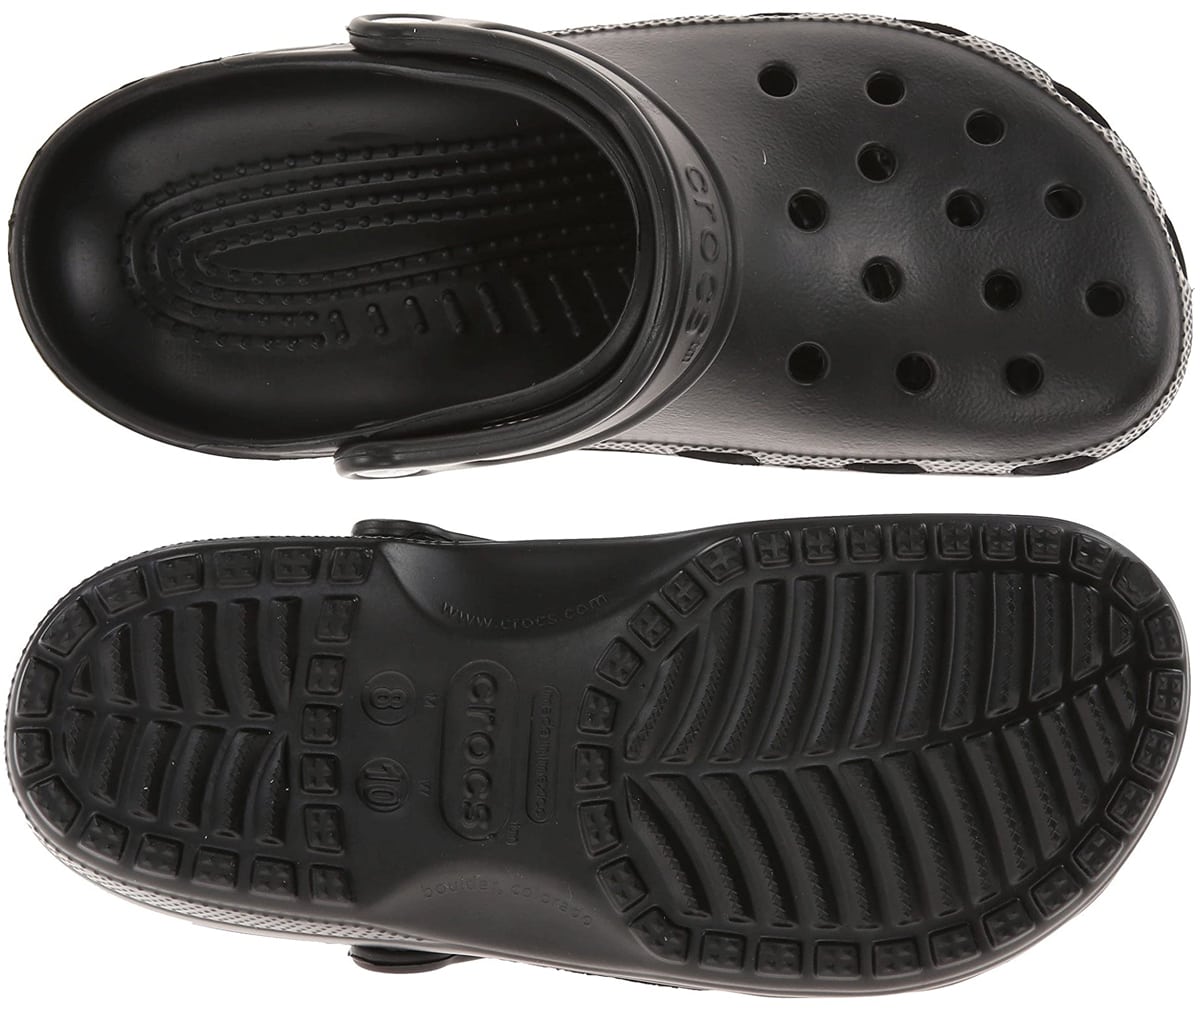 Crocs are designed with ventilation holes to allow for better air circulation and faster evaporation of sweat, helping to keep your feet dry and comfortable